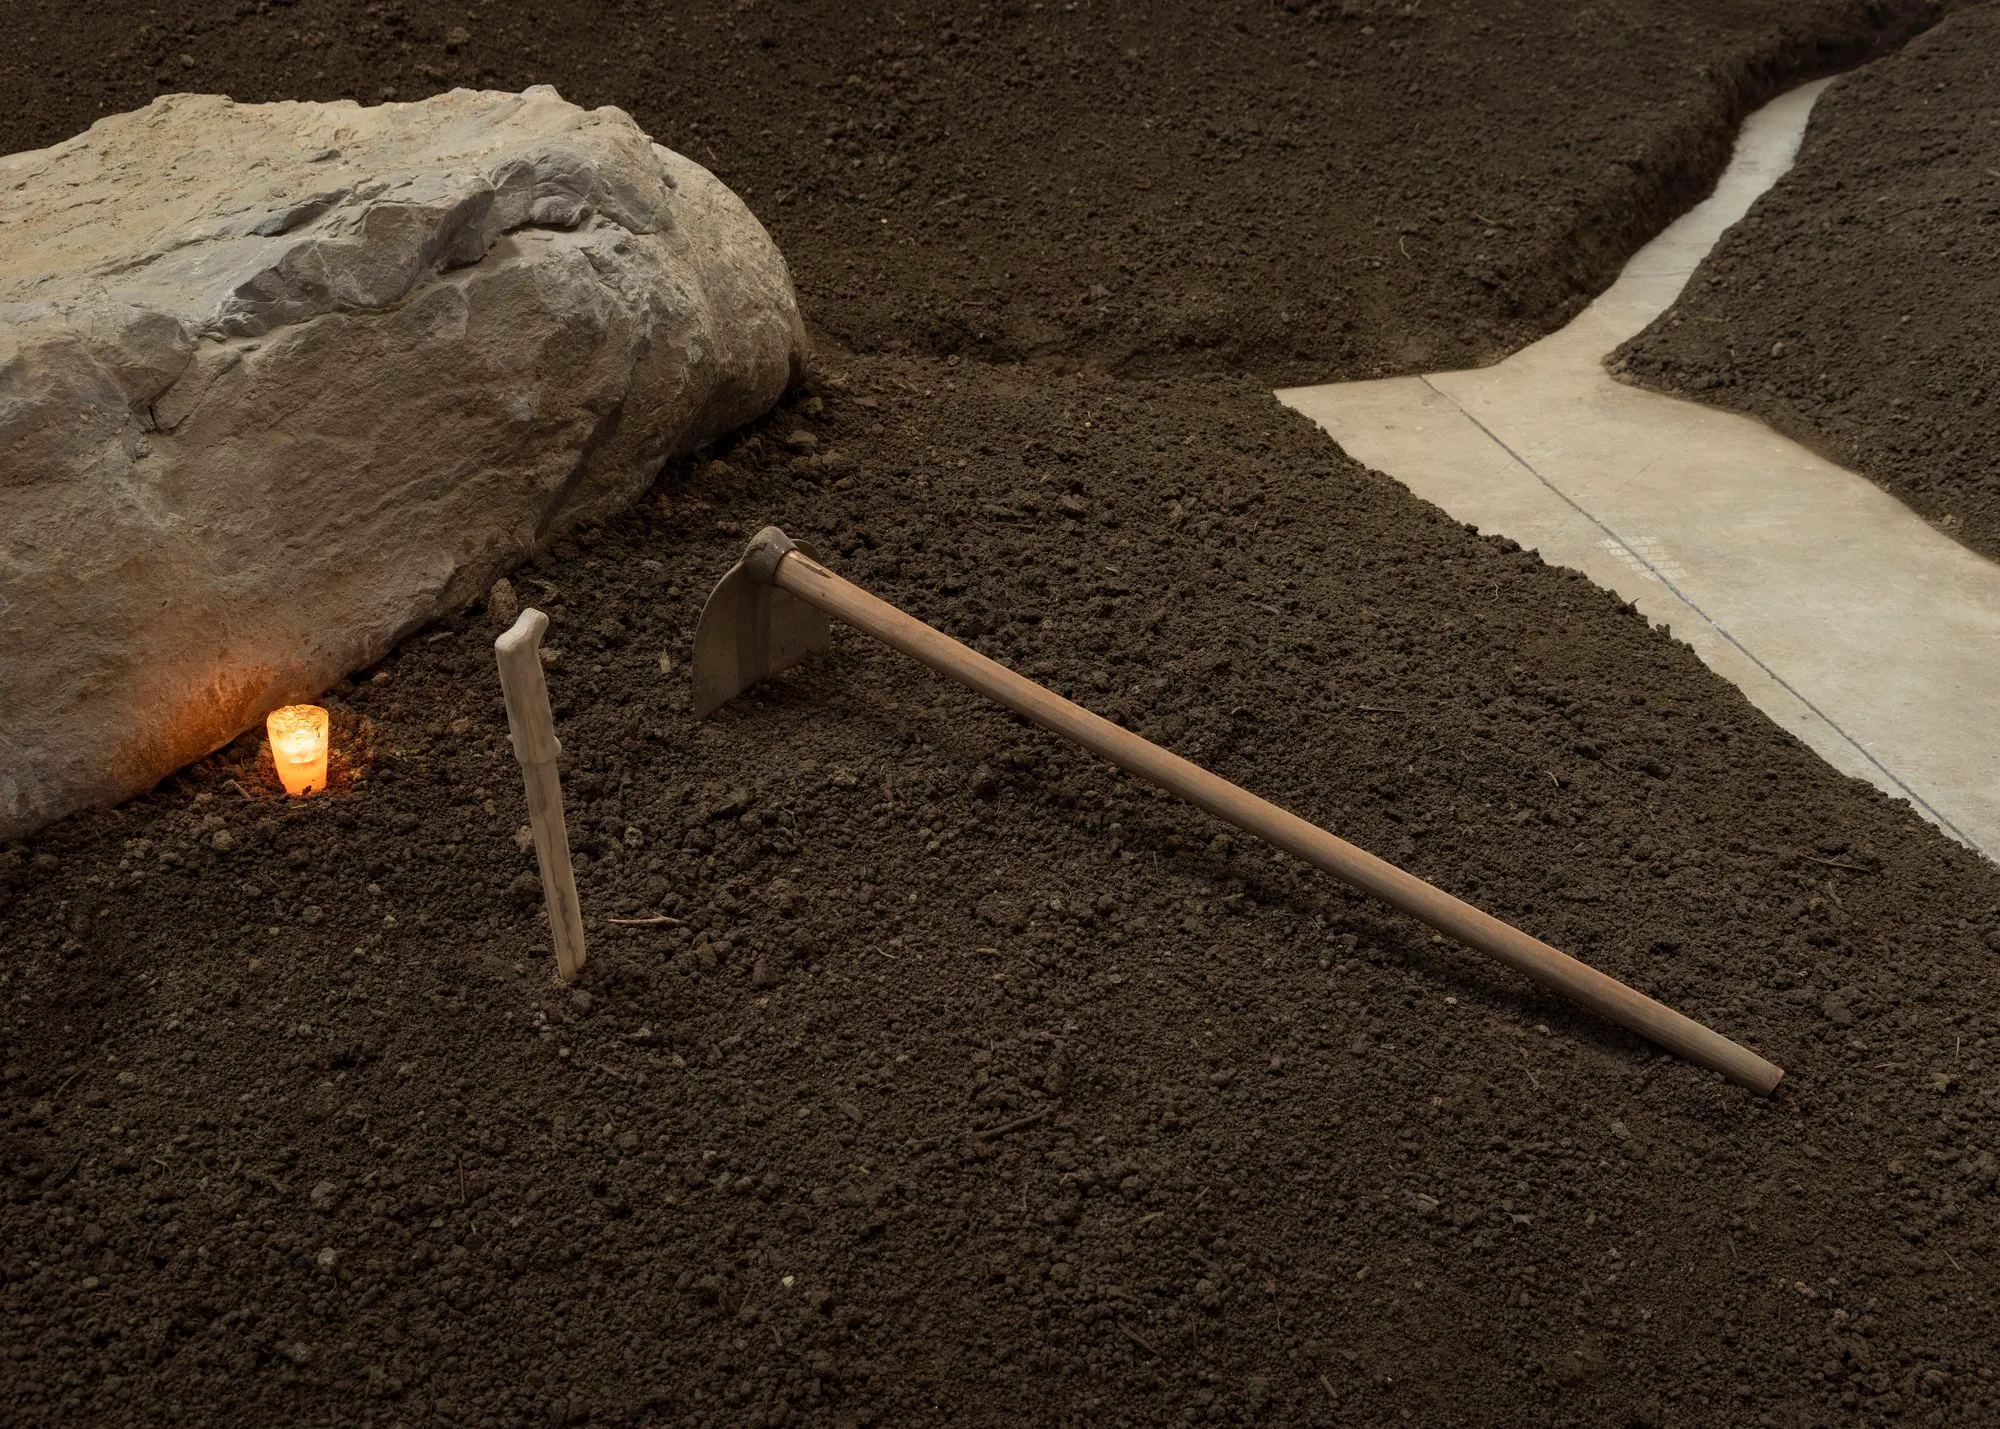 Close up of the installation: a rock, a candle, a wooden knife and a hoe on the brown soil